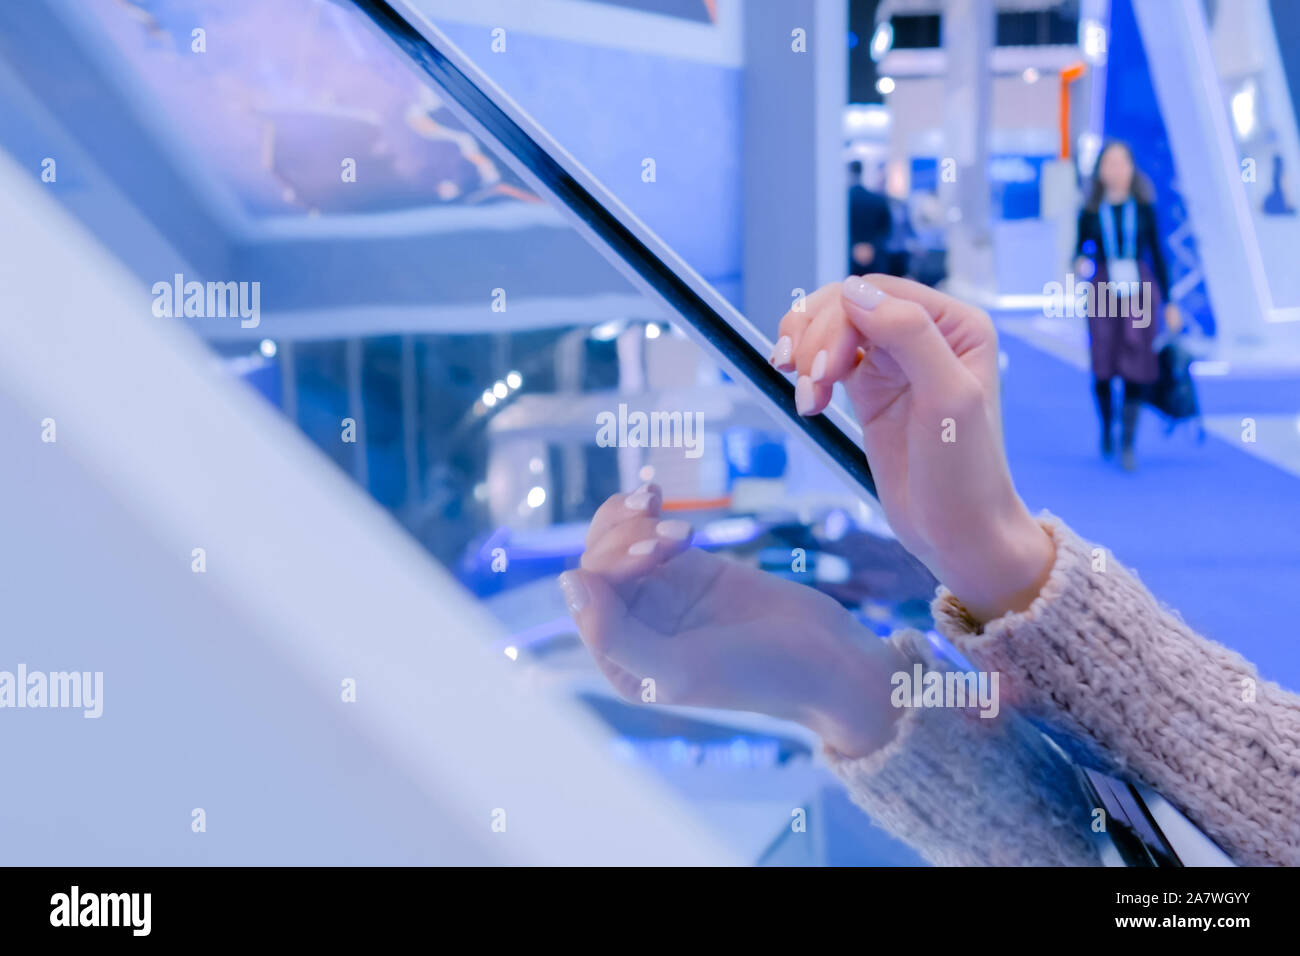 Woman using interactive touchscreen display at technology exhibition Stock Photo